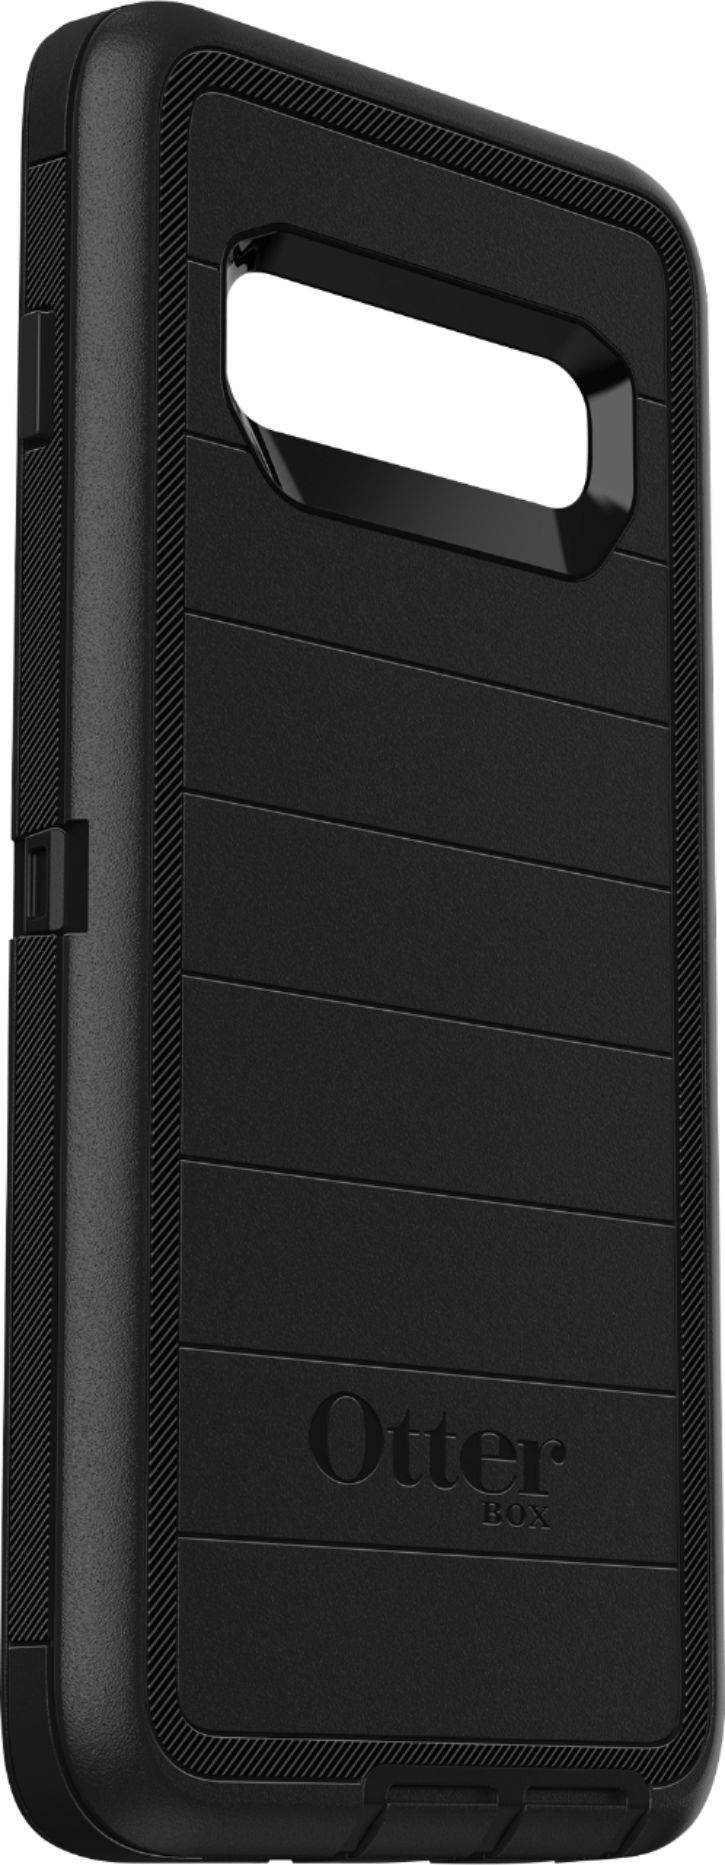 Angle View: OtterBox - Defender Series Pro Holster Case for Samsung Galaxy S10 - Black